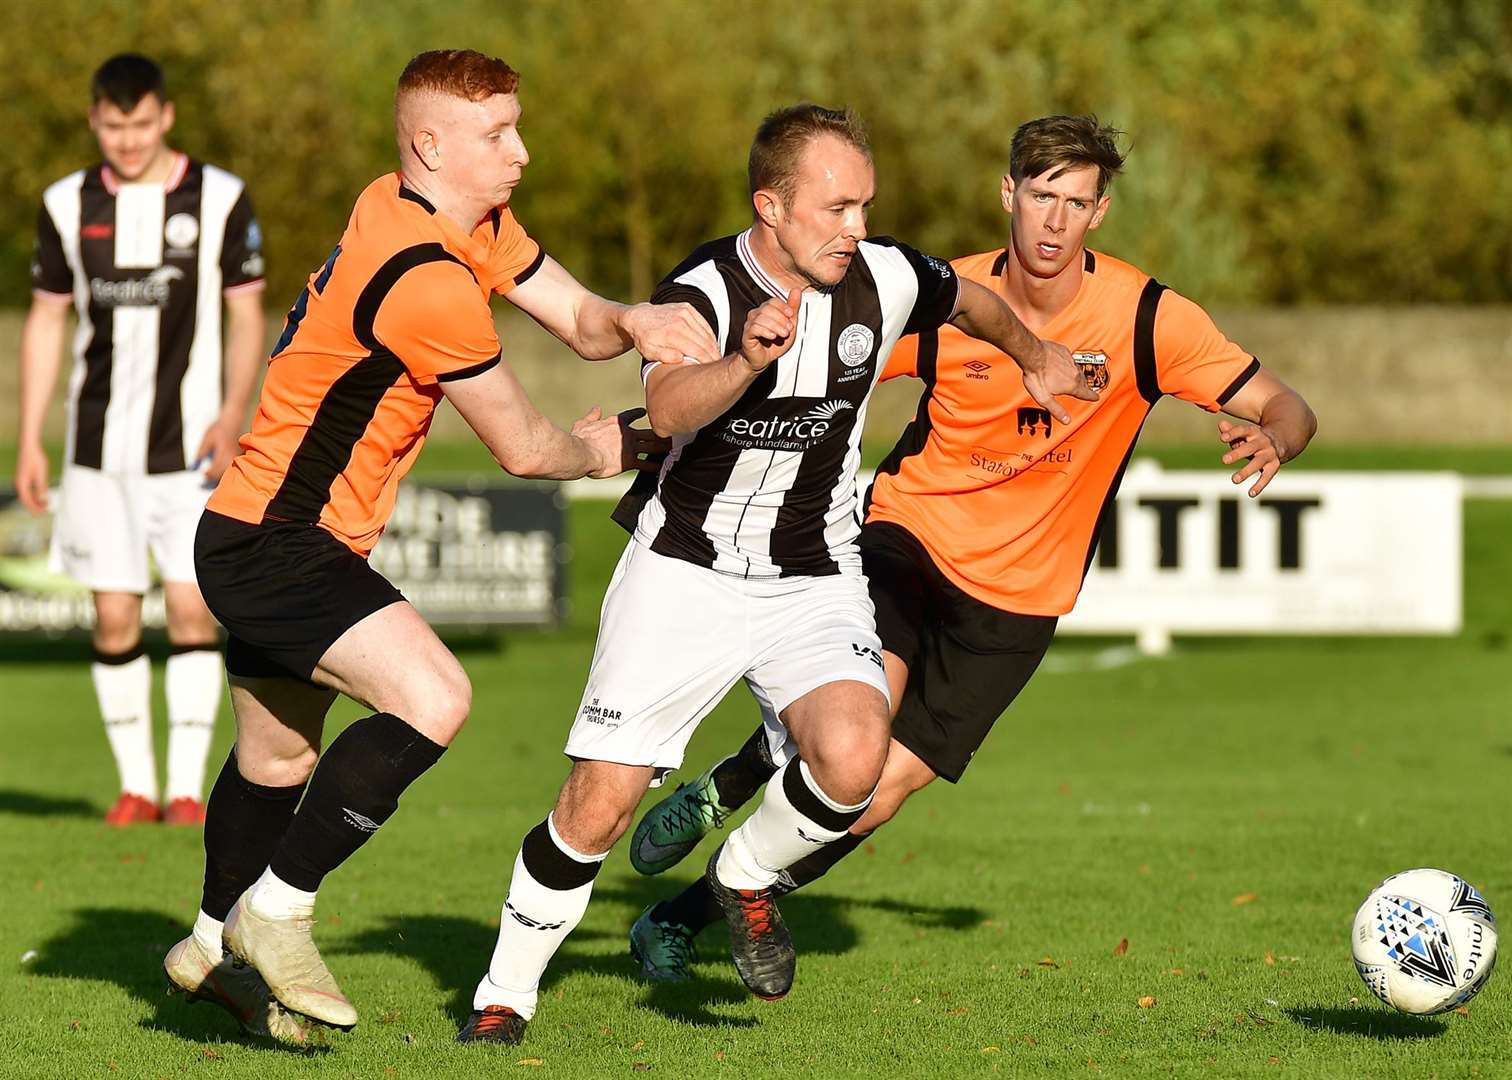 Wick Academy's Richard Macadie drives past Rothes' Aiden Wilson and Allen Mackenzie. The Scorries head to Nairn this weekend – their fifth away match in a row. Picture: Mel Roger